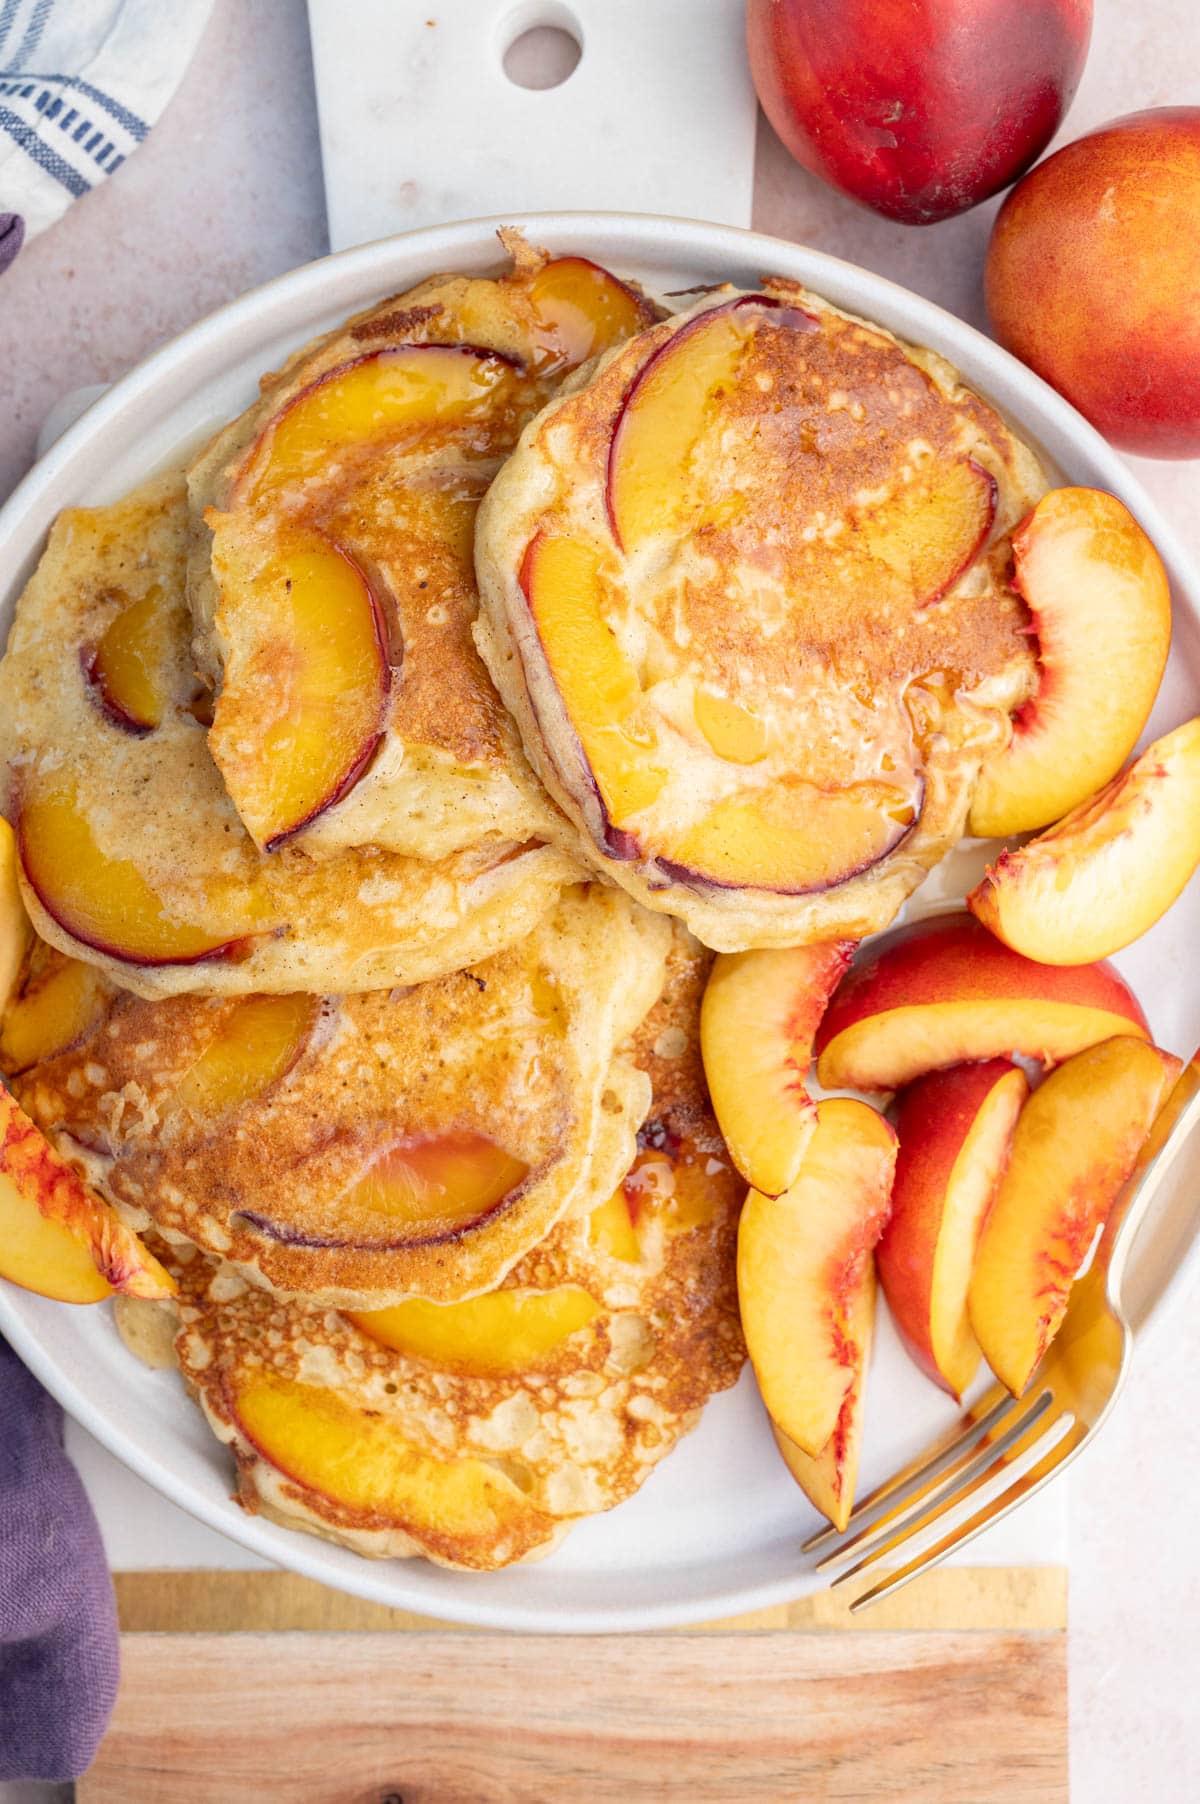 Peach pancakes on a white plate with fresh peach wedges. Whole peaches in the background.